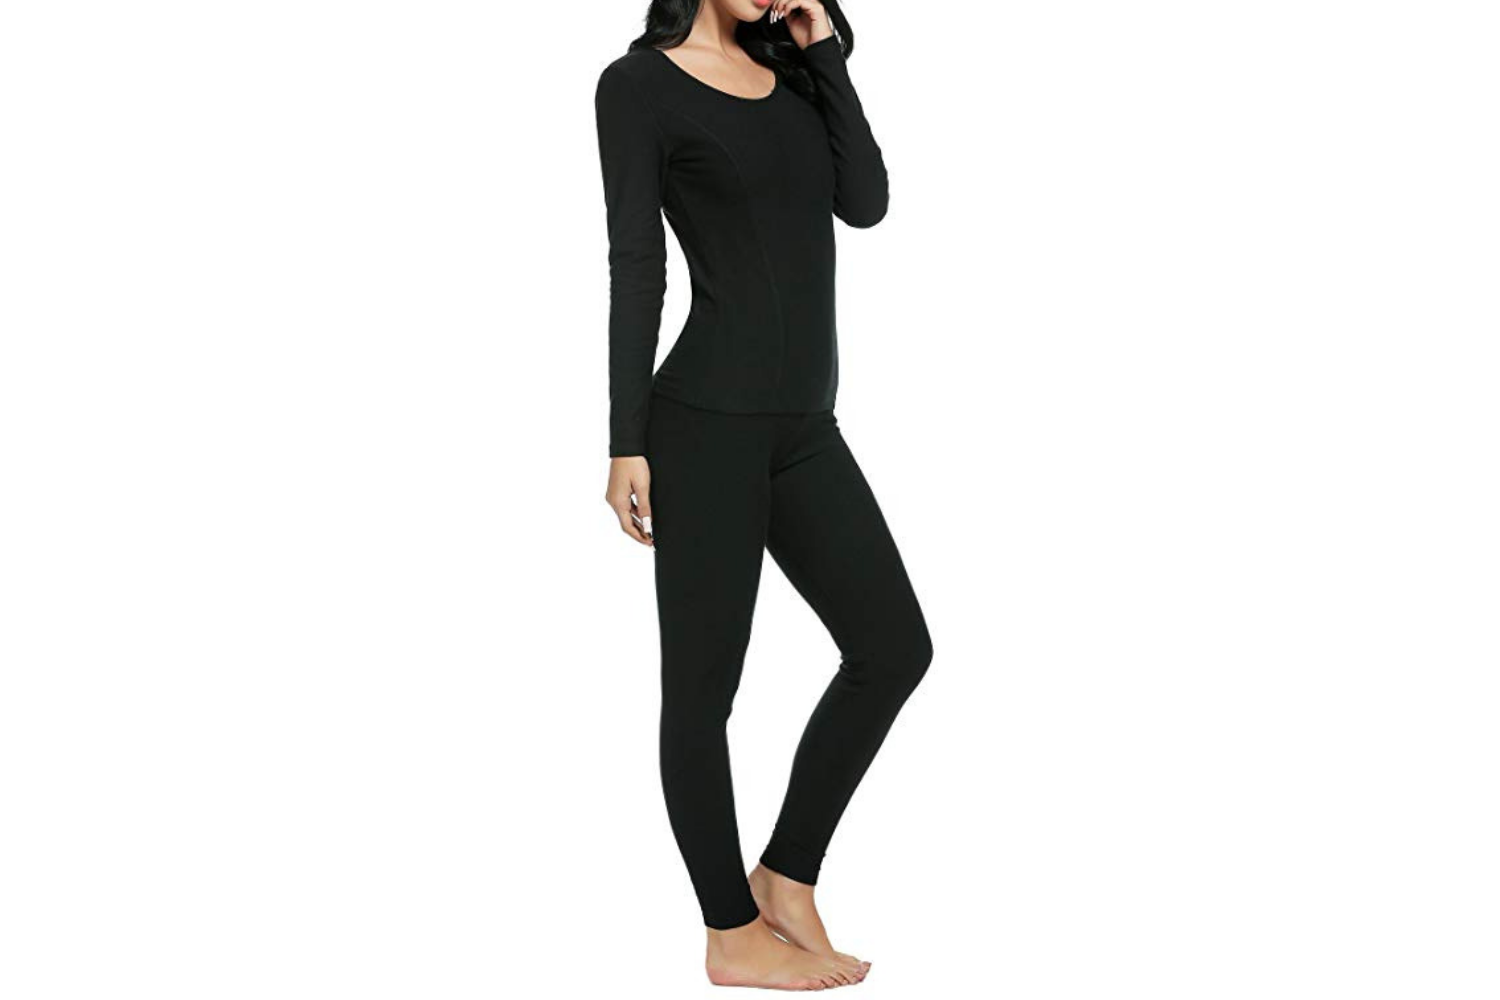 10 Best Thermal Underwear For Women To Use In Extreme Cold – 2022 ...